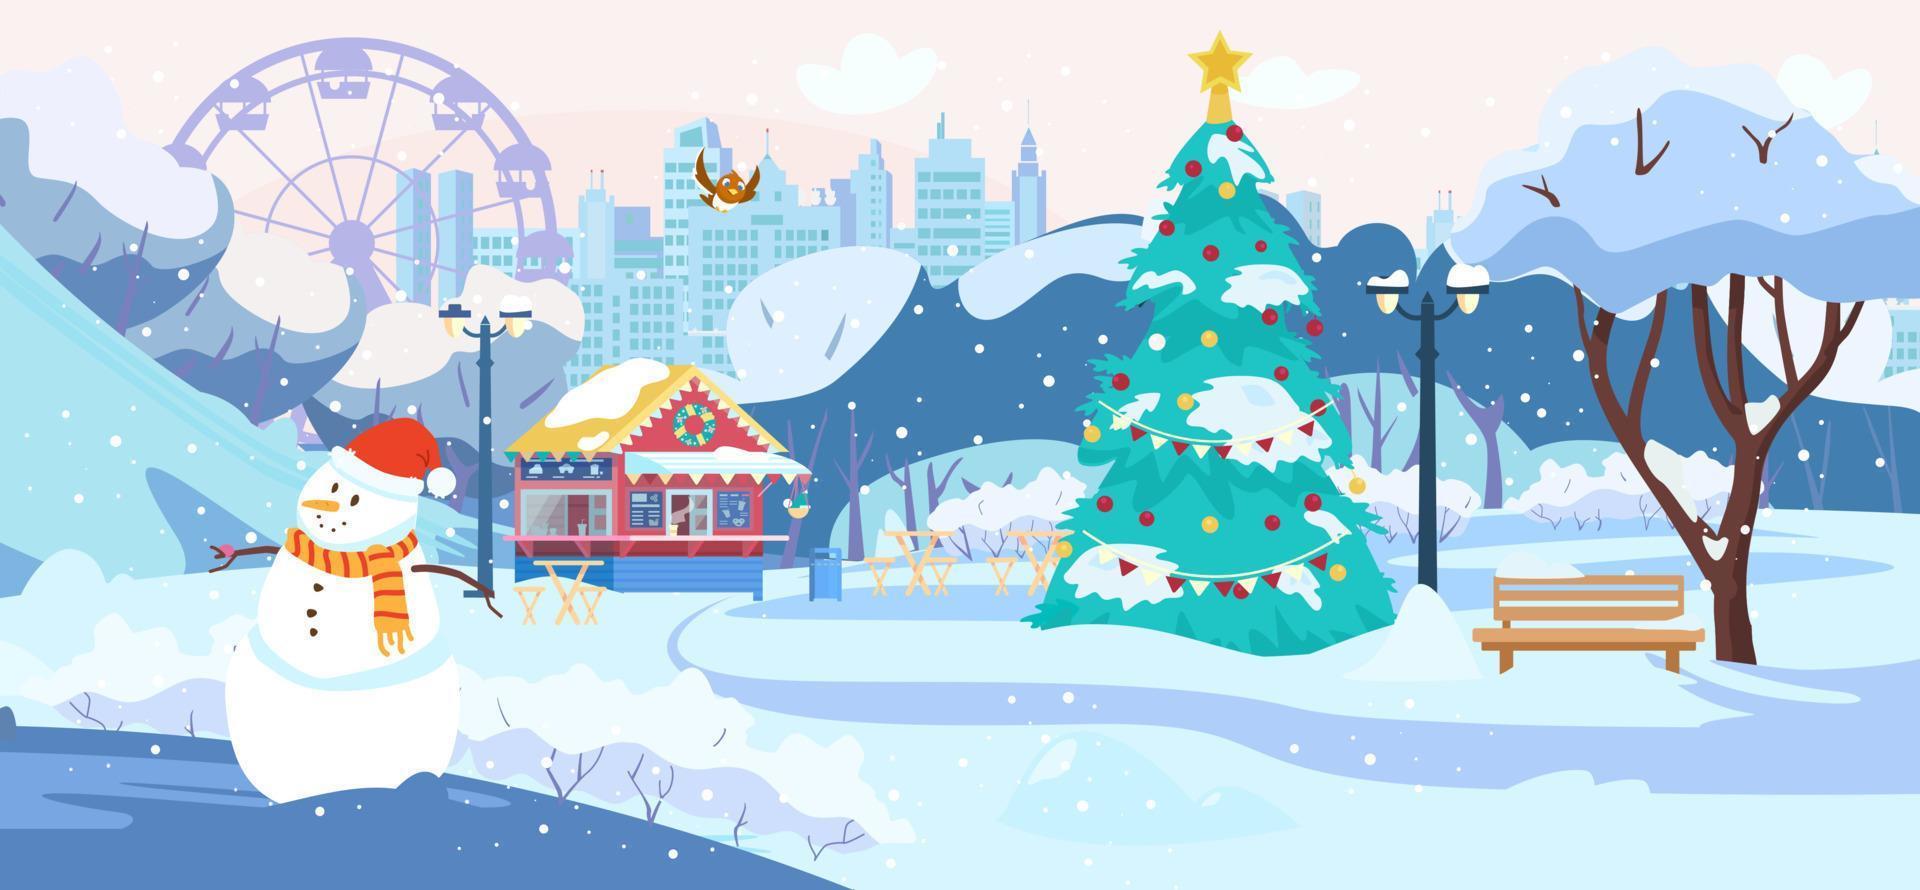 Winter Park Scenery With No People. Park Cafe, City Silhouette, Christmas Tree, Snowy Trees. Flat Vector Illustration.